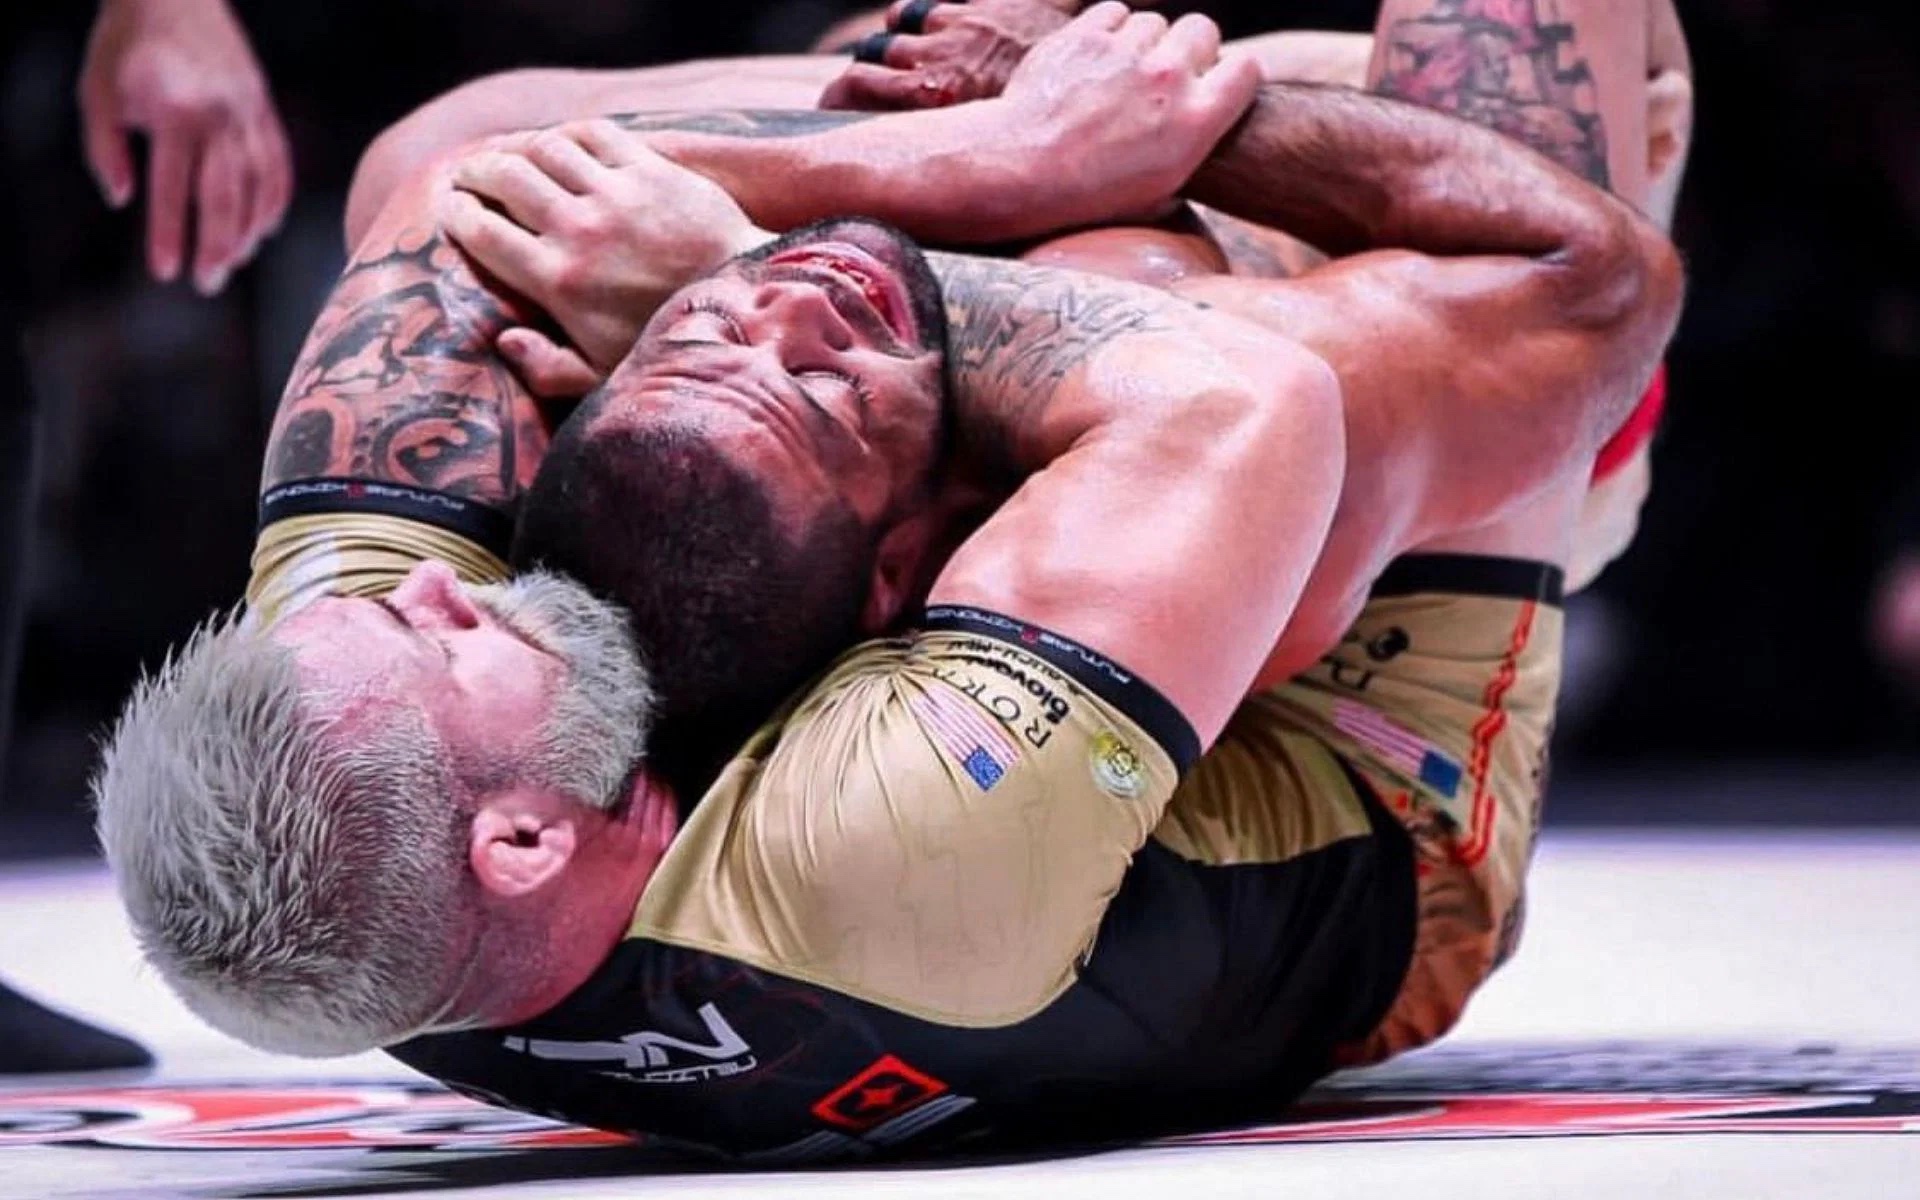 For the First Time In ADCC History USA Overtakes Brazil in Medal Count